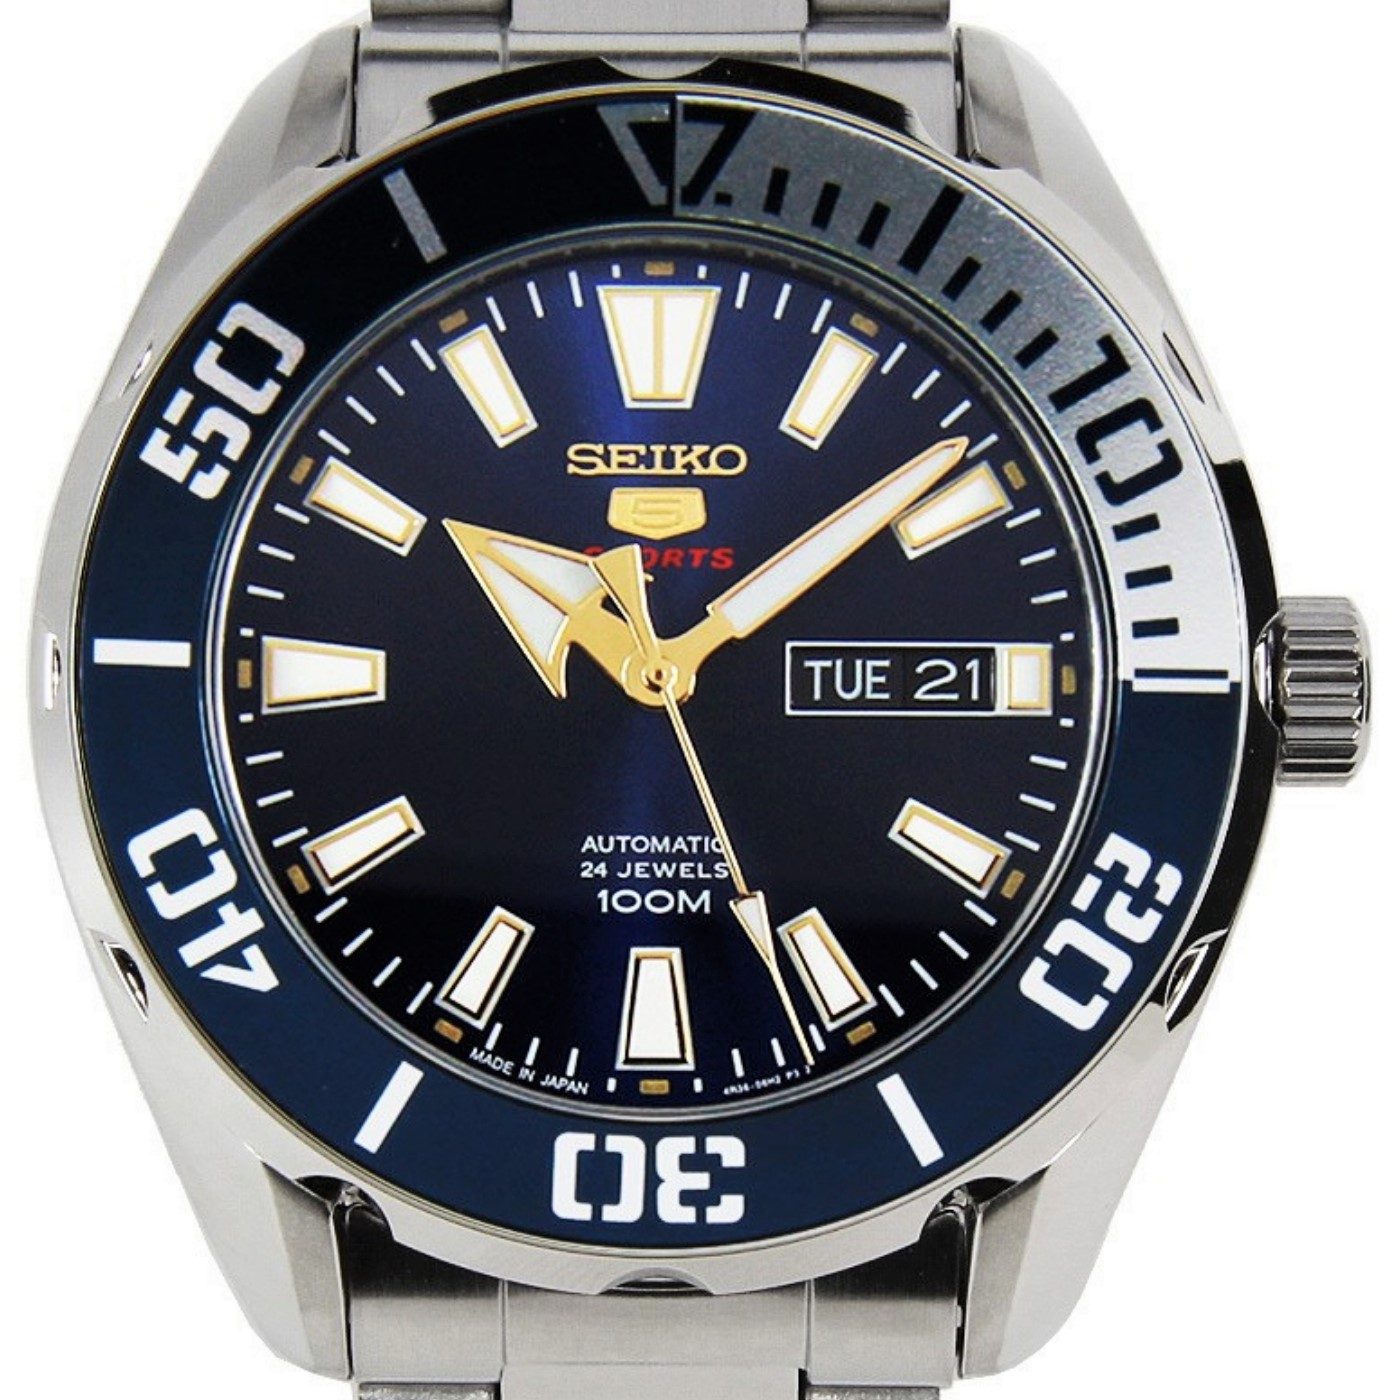 SEIKO 5 Sports SRPC51J Japan Made Automatic Blue Dial Stainless Steel